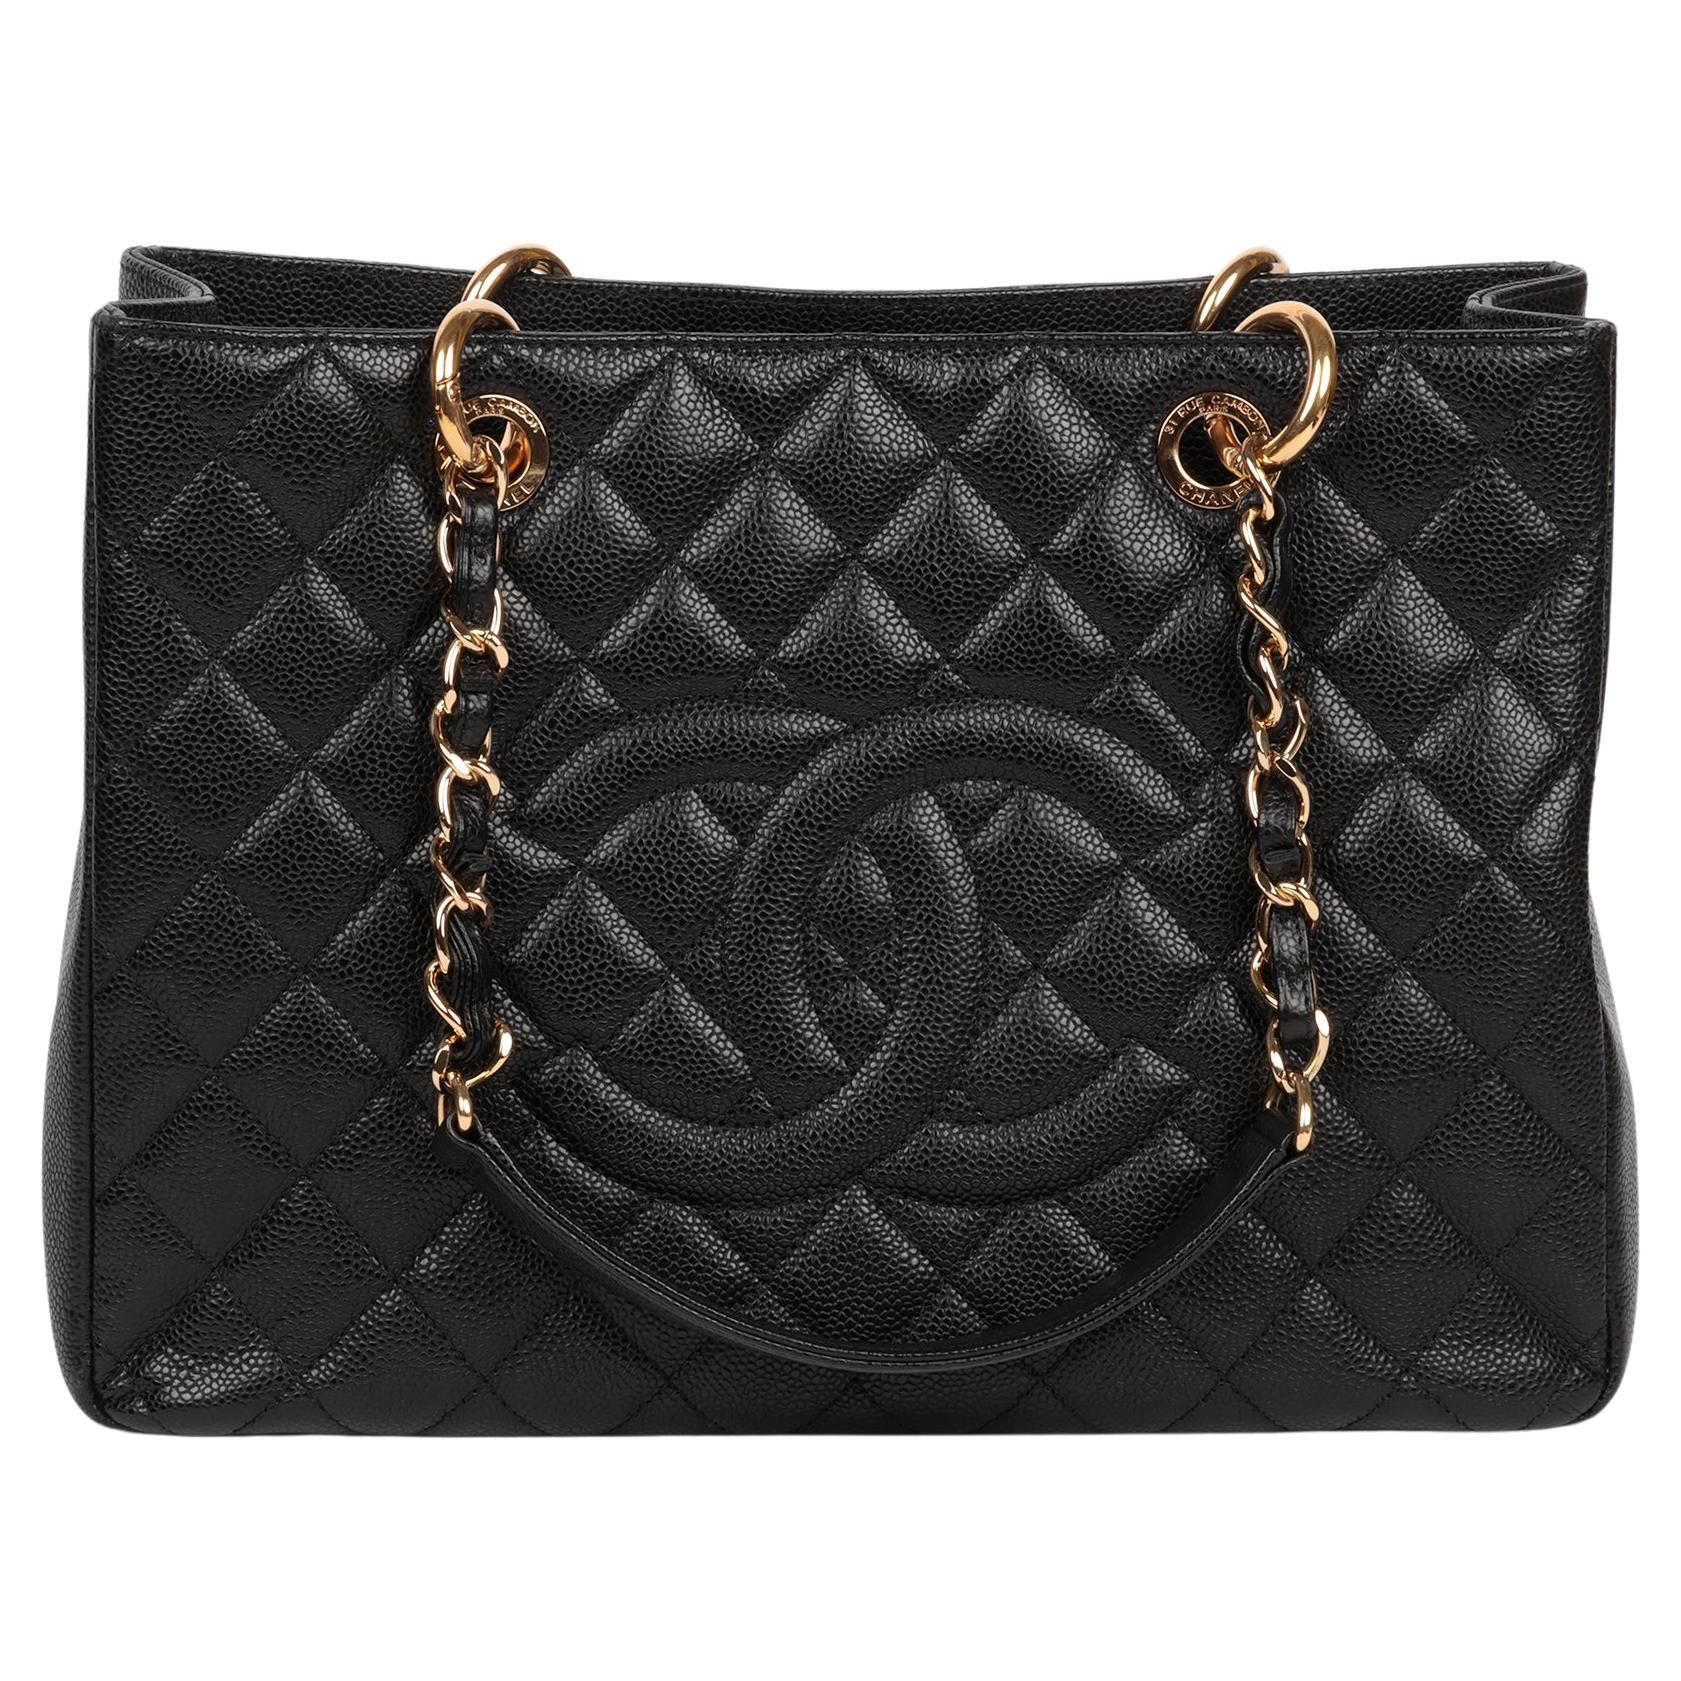 Where can I buy secondhand Chanel bags?